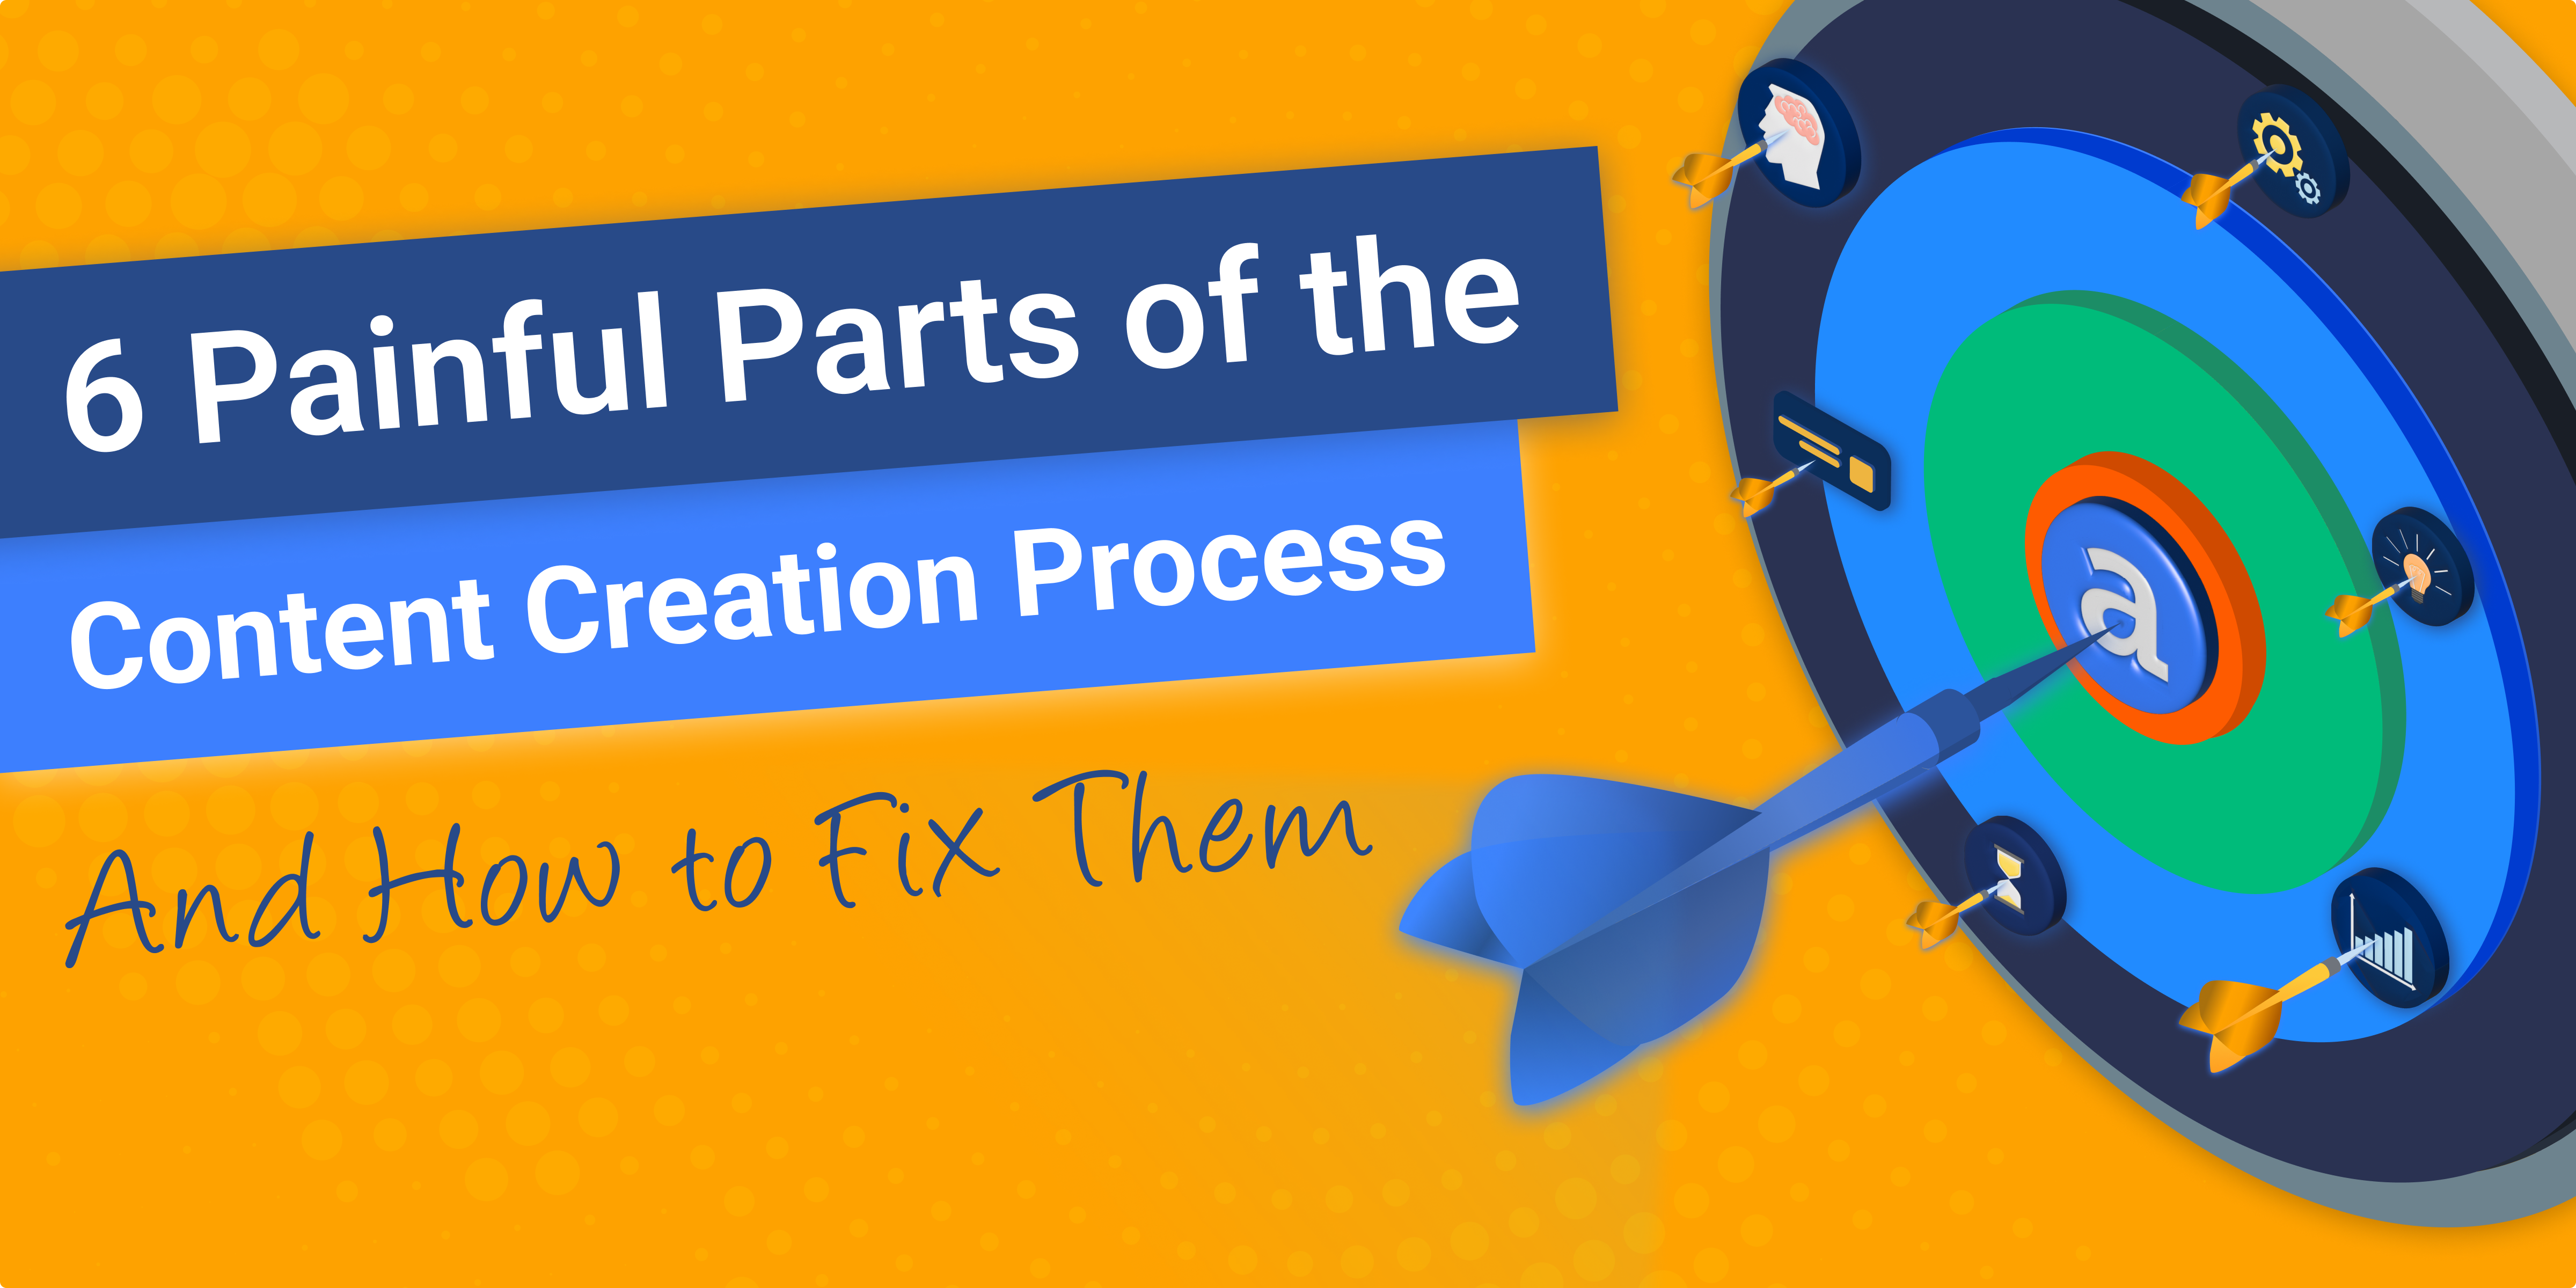 Anyword Blog - 6 Content Creation Pains And How To Fix Them